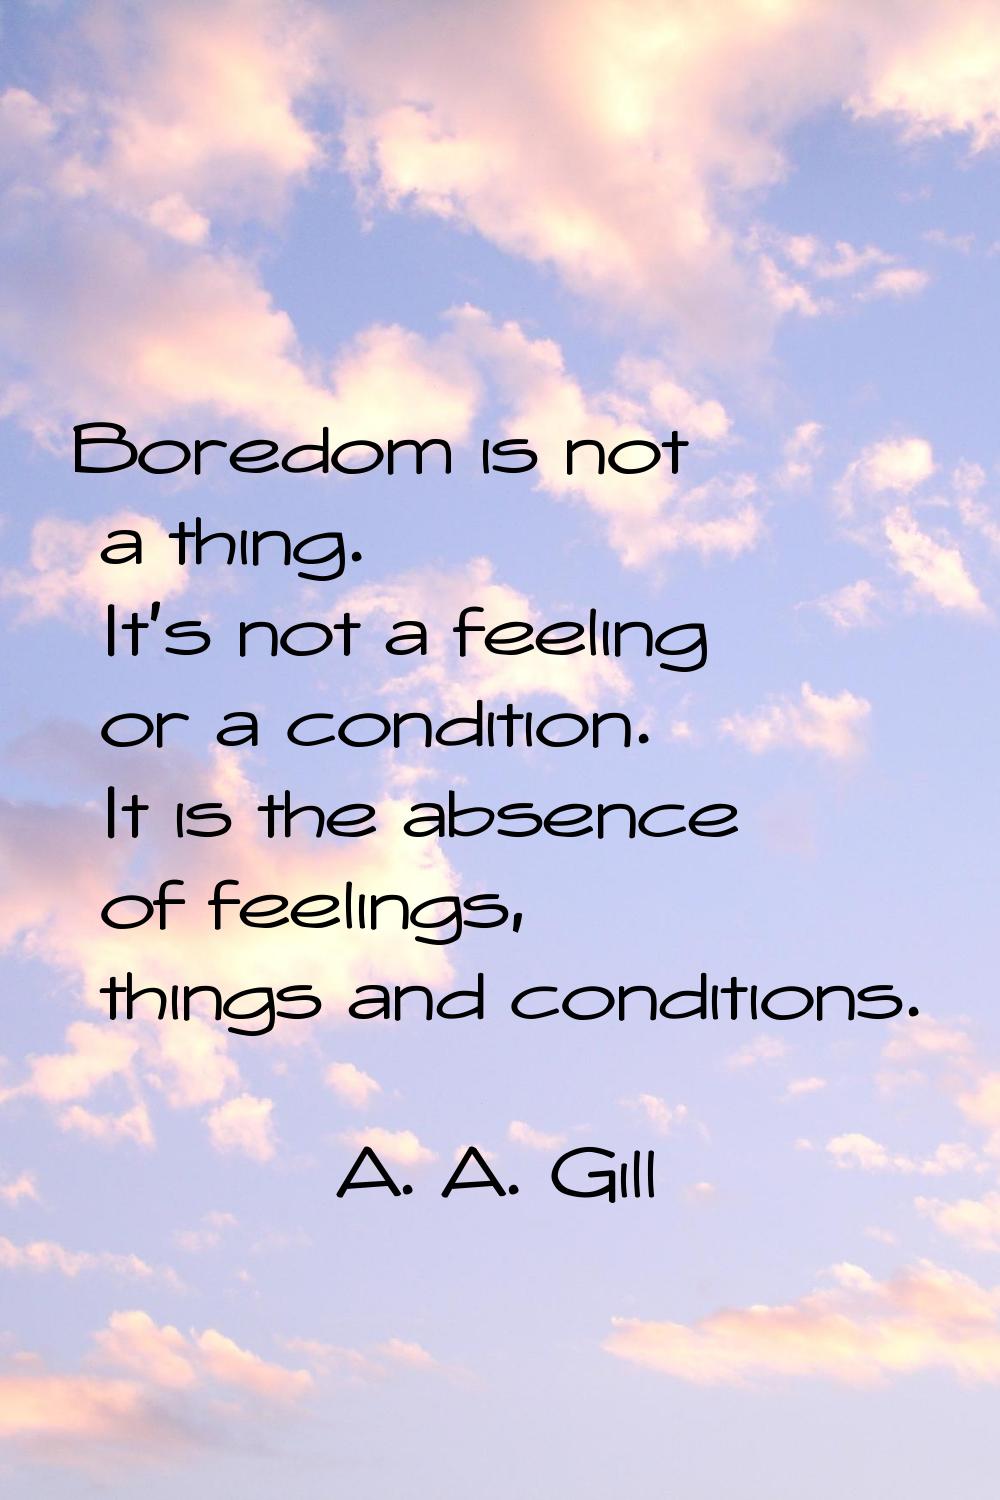 Boredom is not a thing. It's not a feeling or a condition. It is the absence of feelings, things an